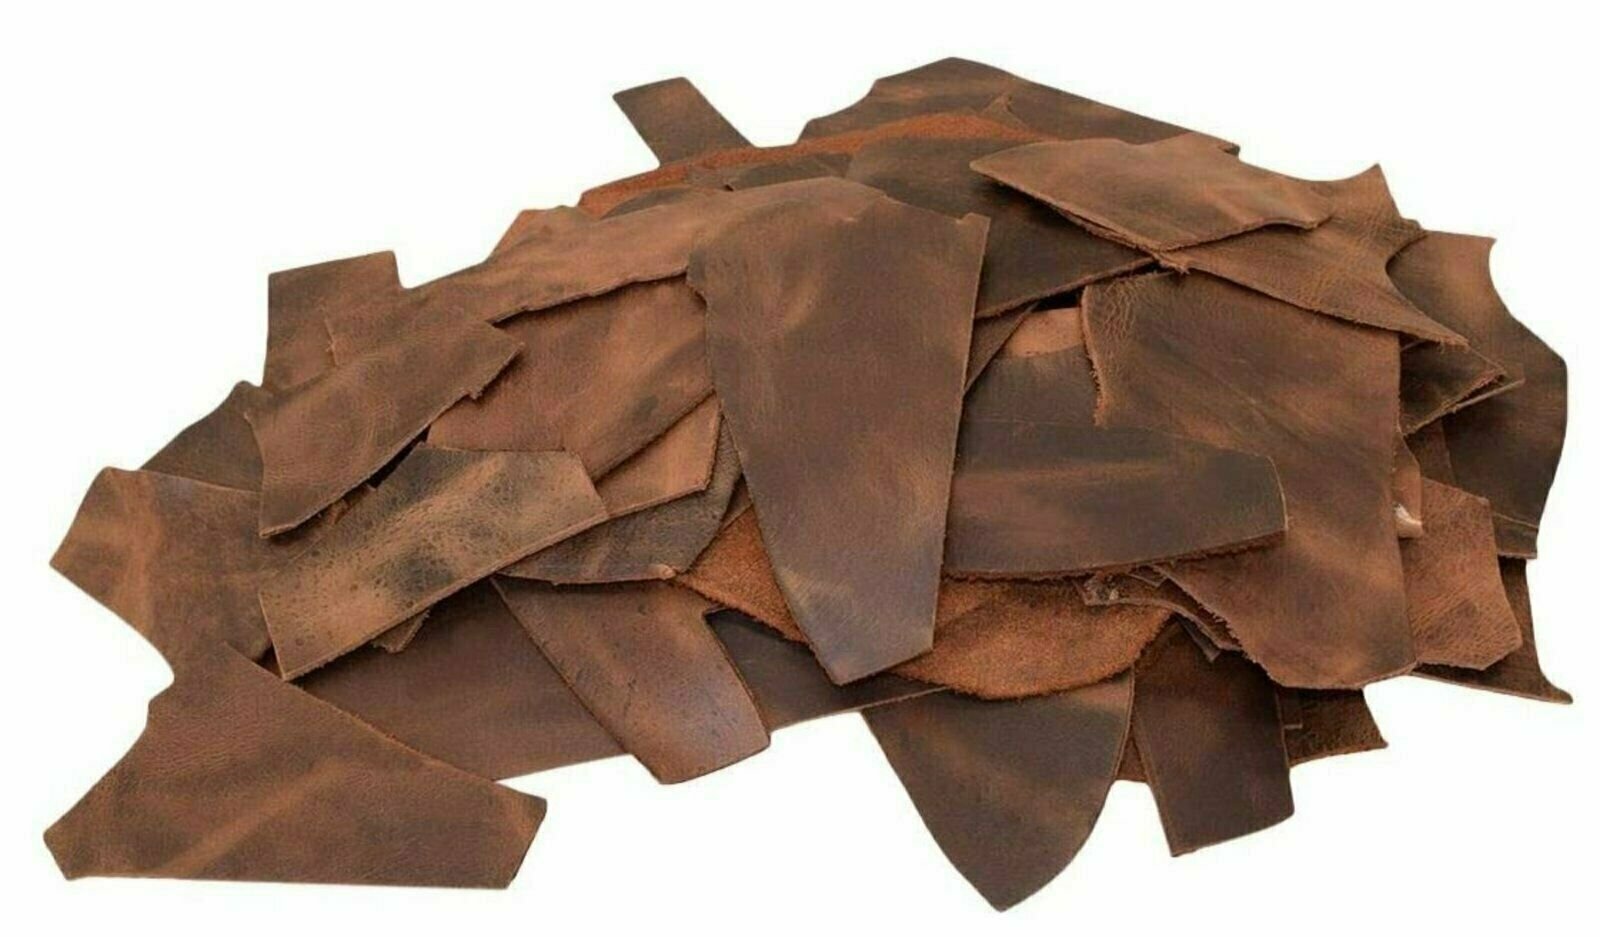 Genuine Leather Tooling and Crafting Sheets | Heavy Duty Full Grain Cowhide  (2mm) | Flotter Tobacco